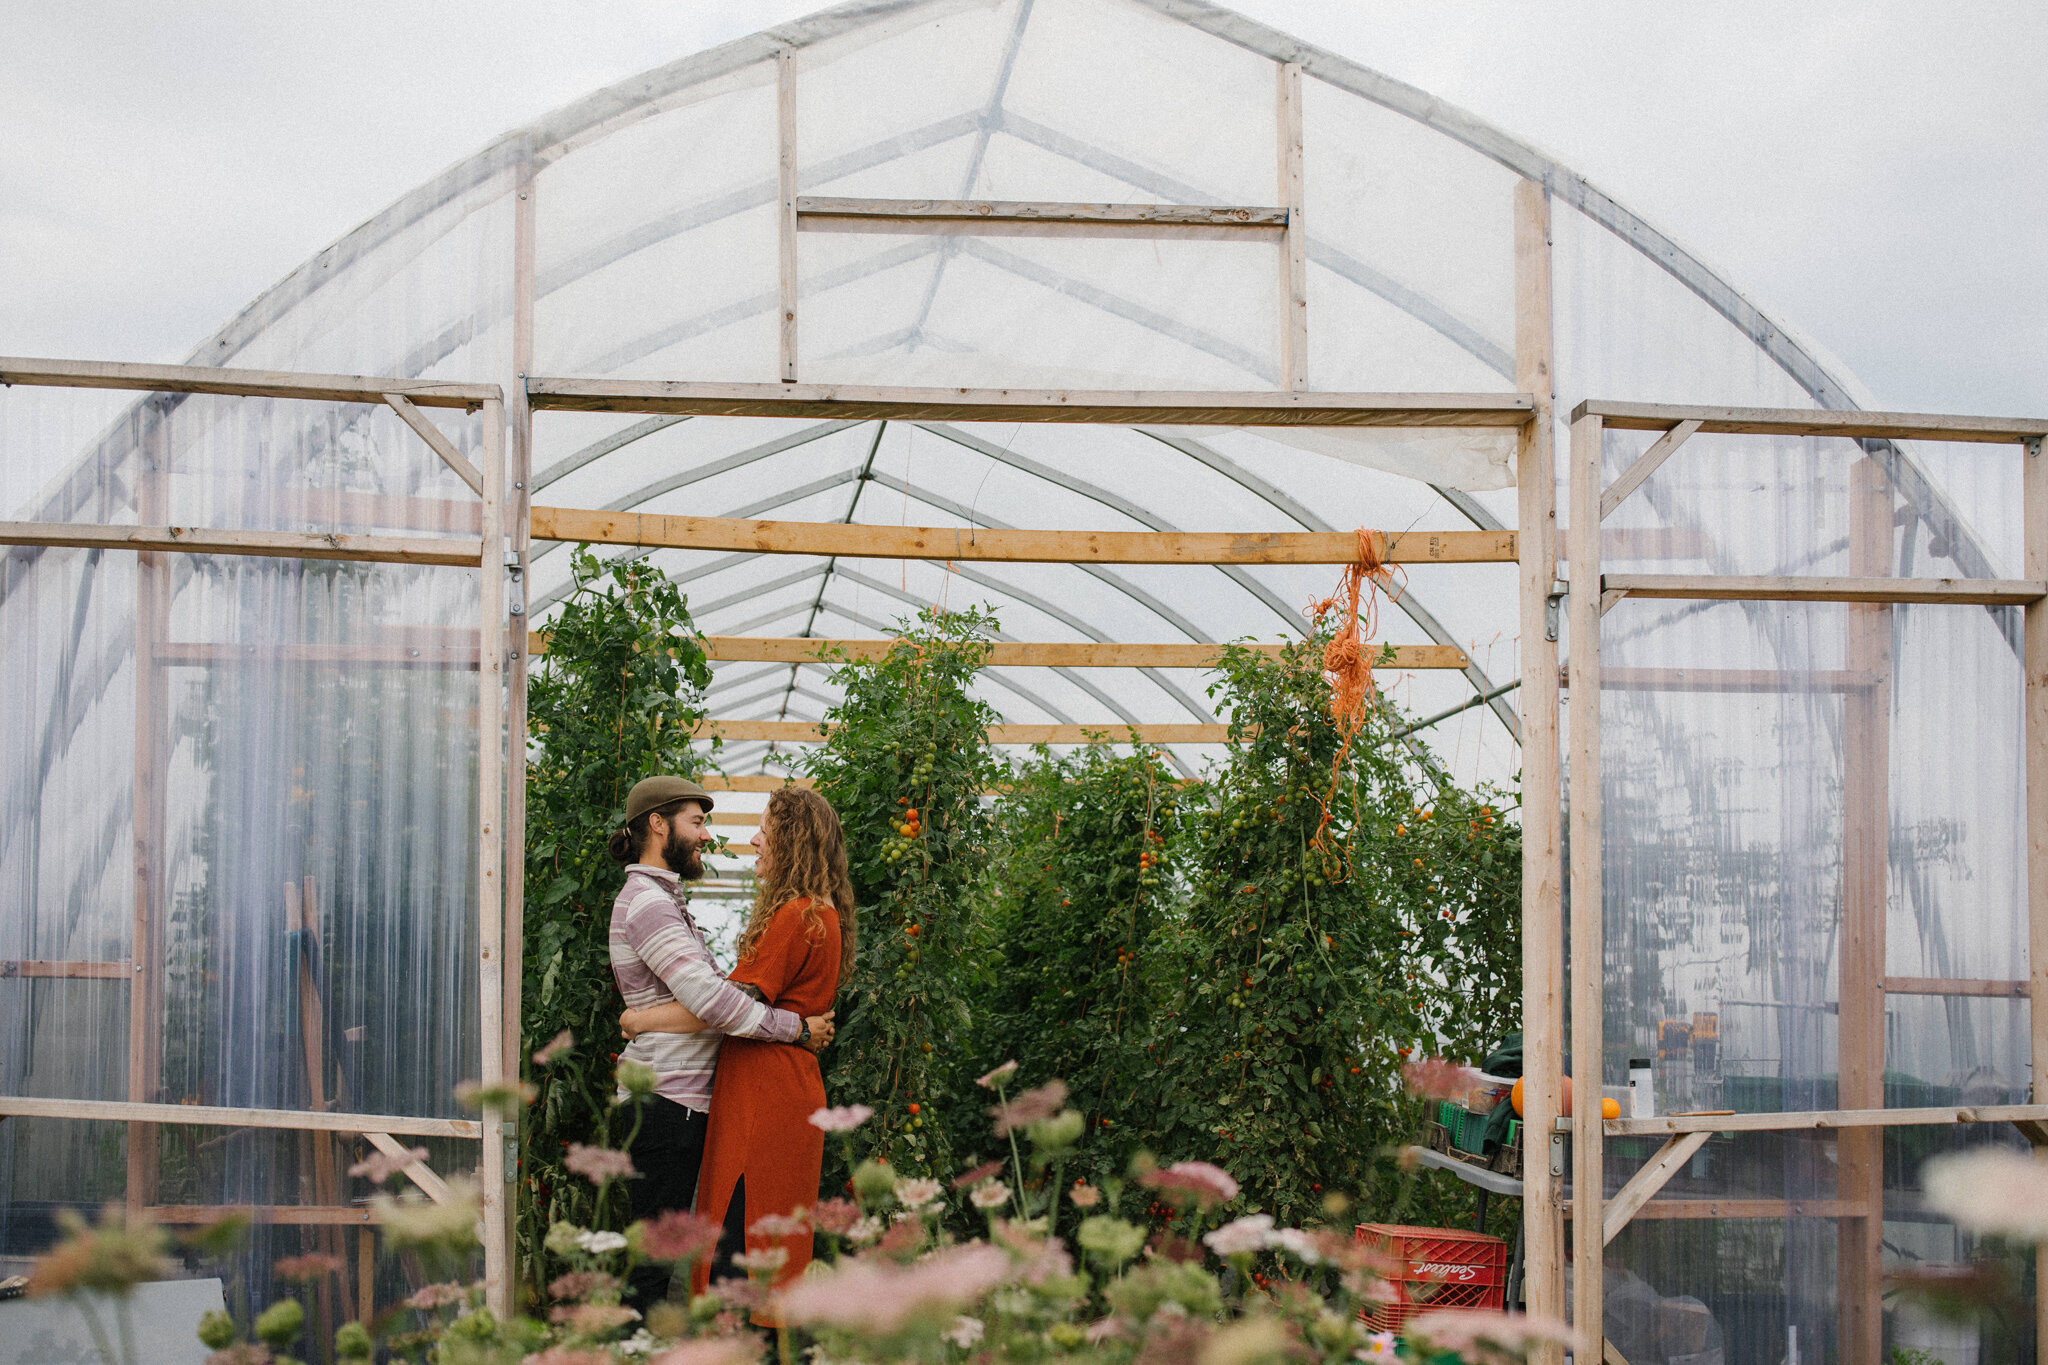 Surprise proposal in the greenhouse at Harvest Moon Farm in Meaf